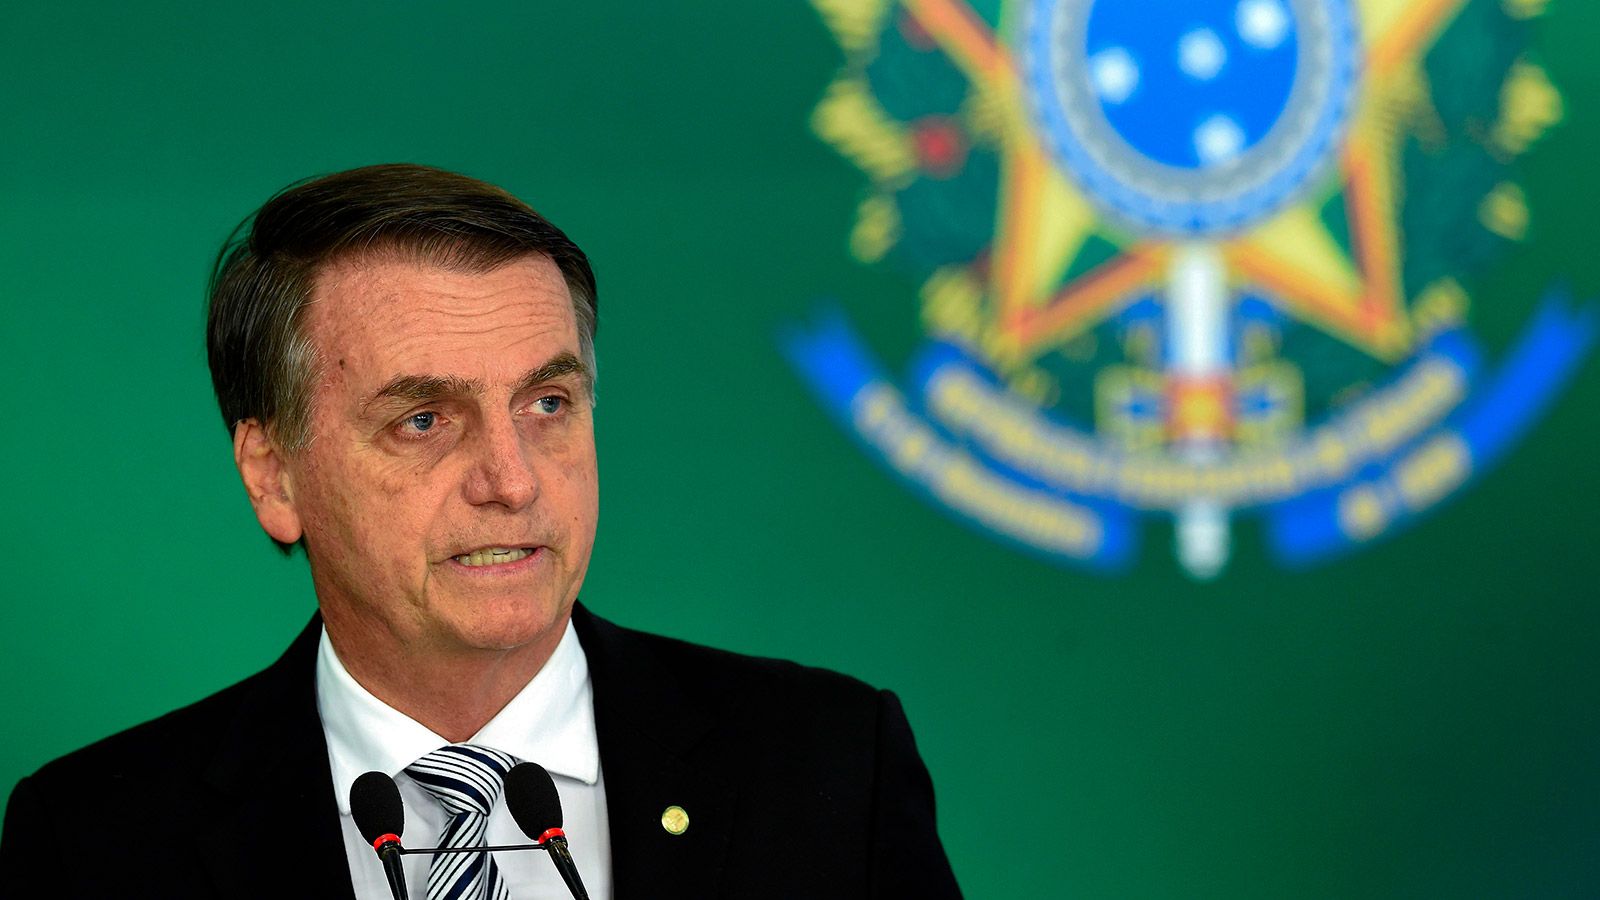 Bad news for the Amazon as Brazil backs out of hosting U.N. climate talks